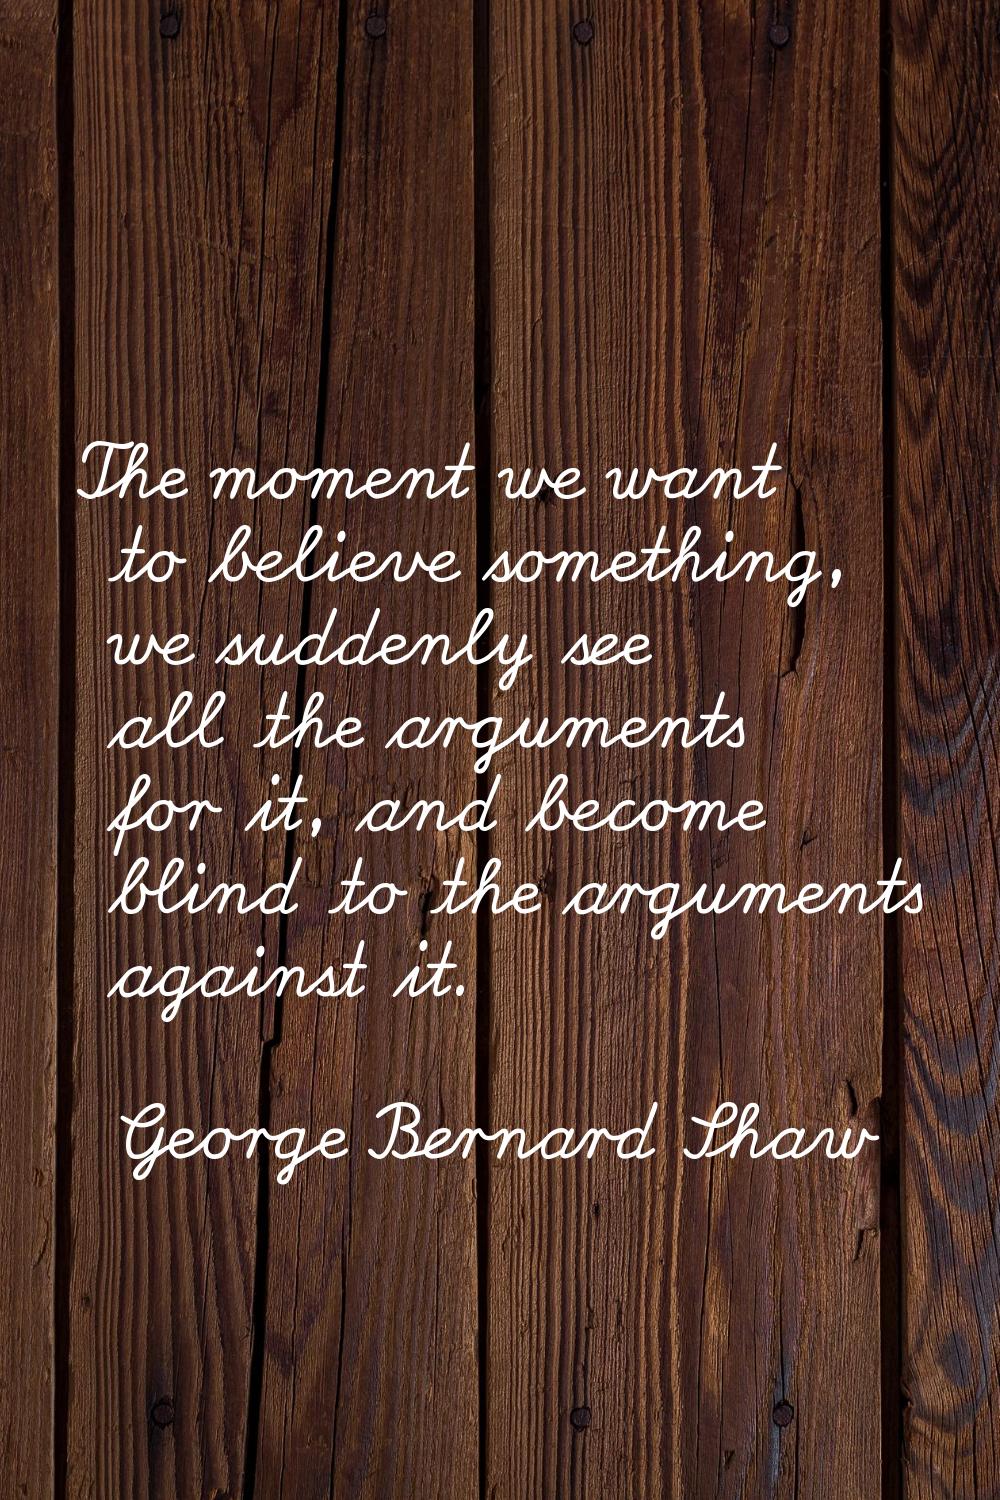 The moment we want to believe something, we suddenly see all the arguments for it, and become blind